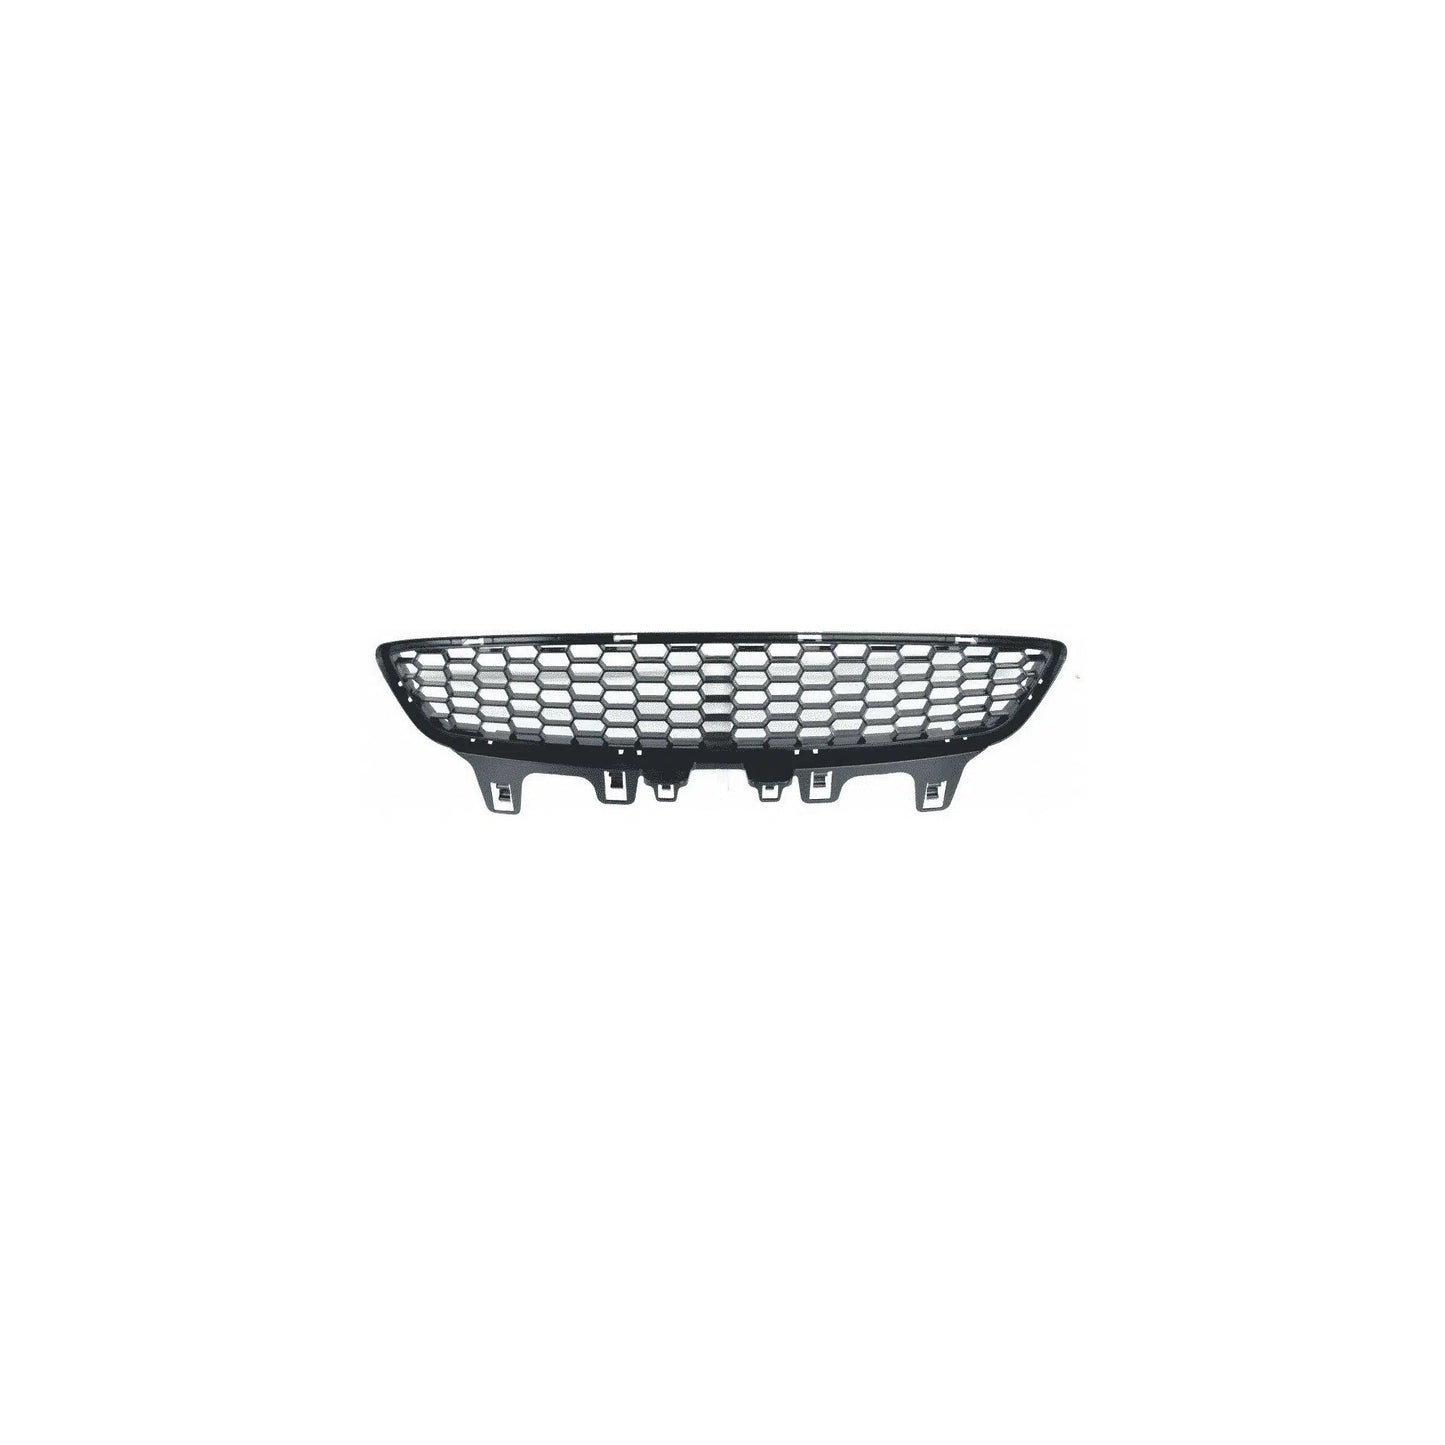 Suvneer OE Replacement F8X Lower Center Mesh Grille